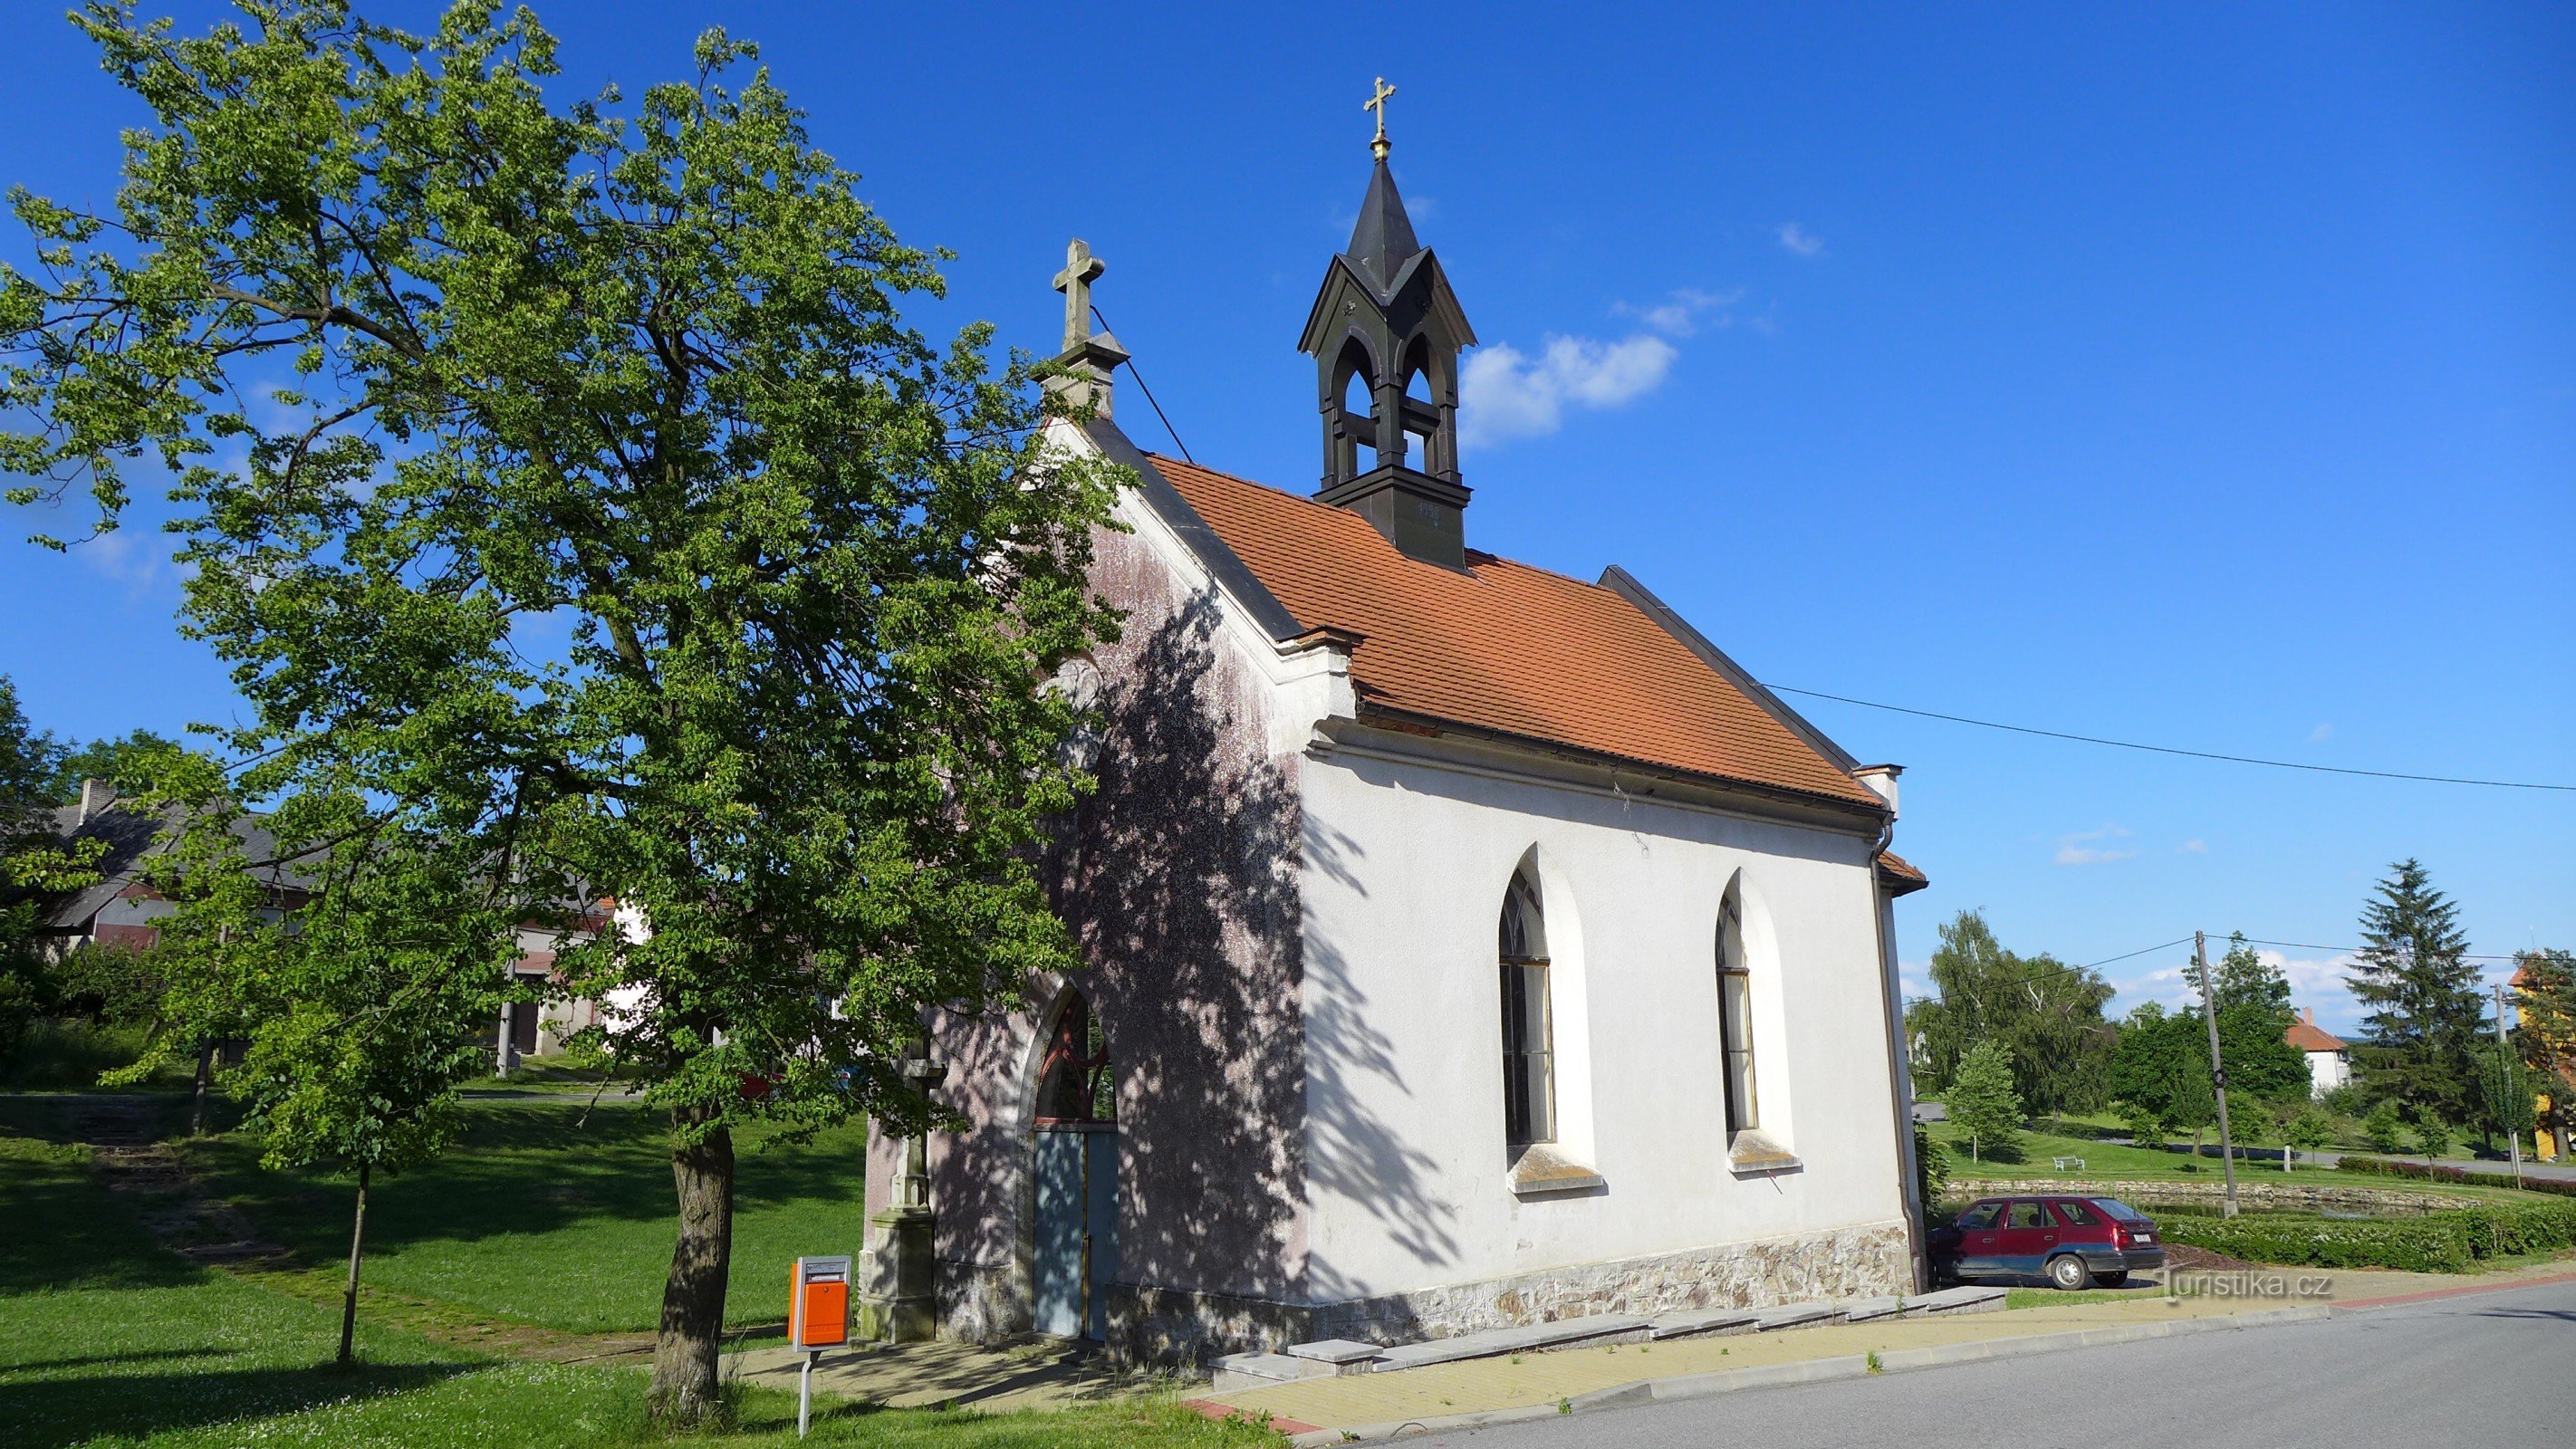 Jindřichovice - chapel of Our Lady of the Rosary